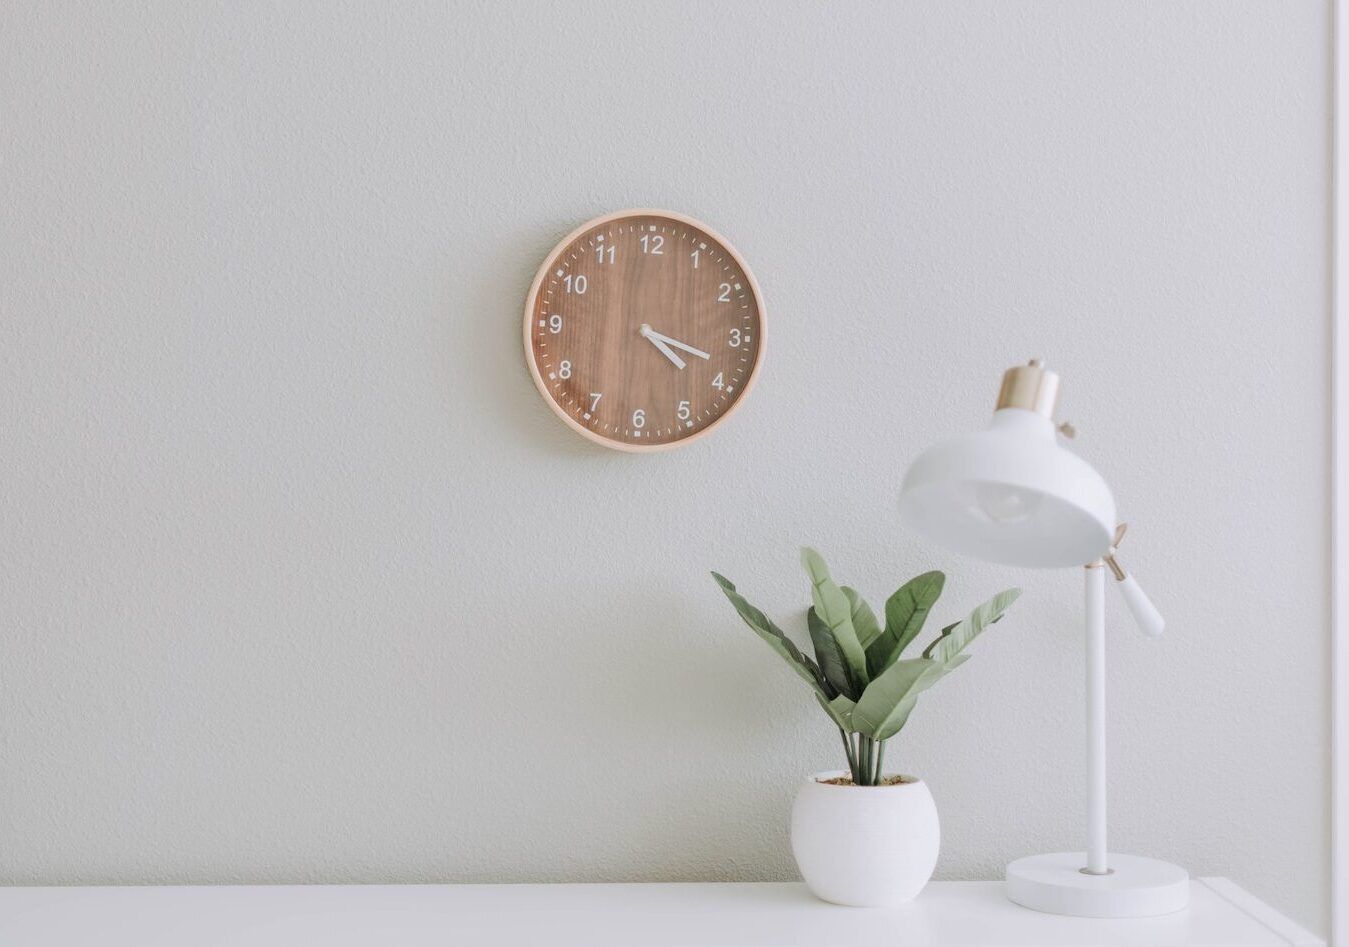 4 approaches to time management desk with clock above and plant